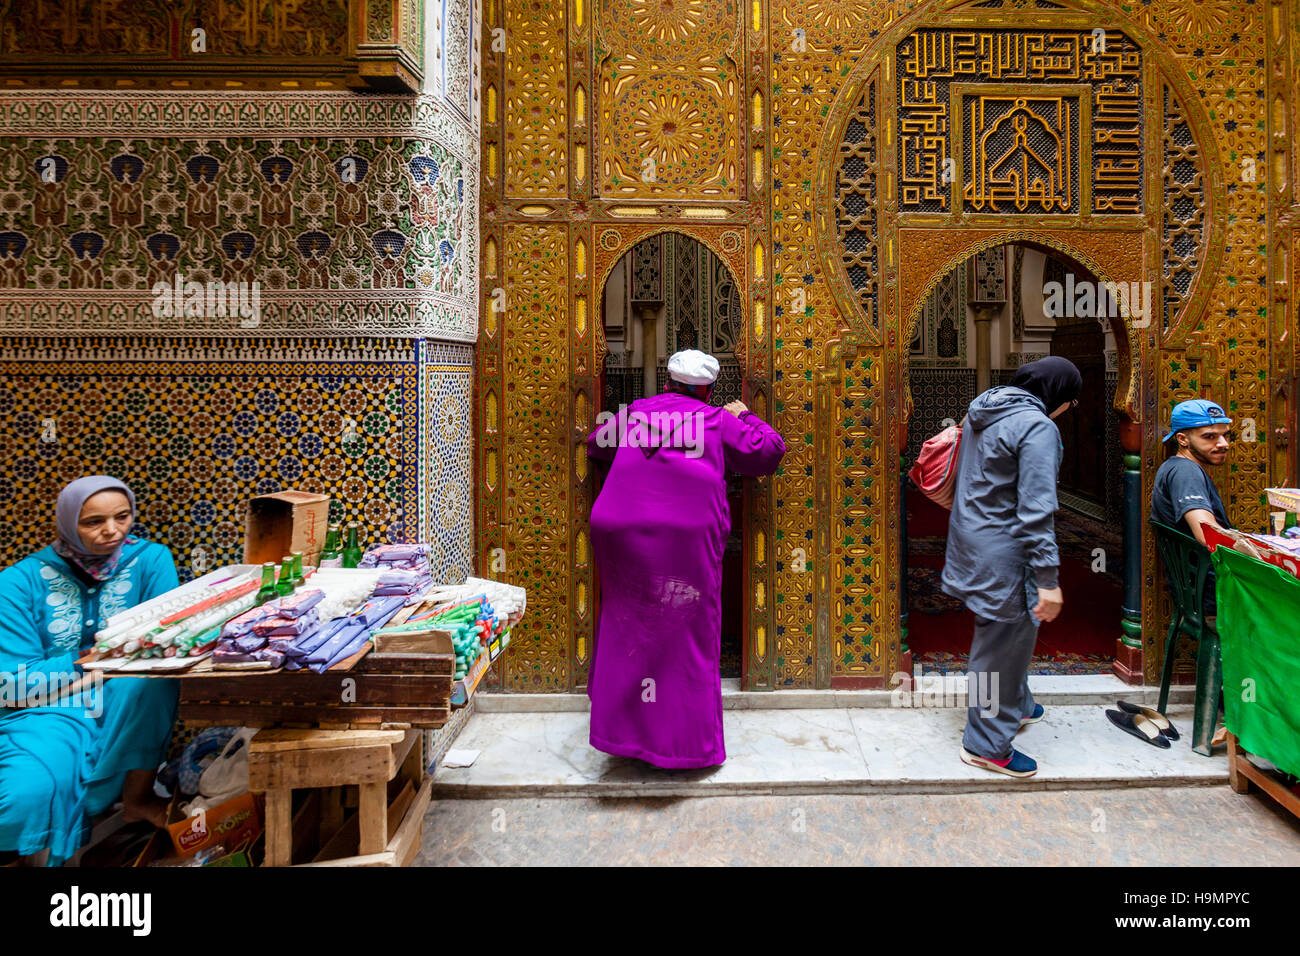 People Entering The Zaouia Moulay Idriss 2 Mosque and Shrine, Fez el Bali, Fez, Morocco Stock Photo